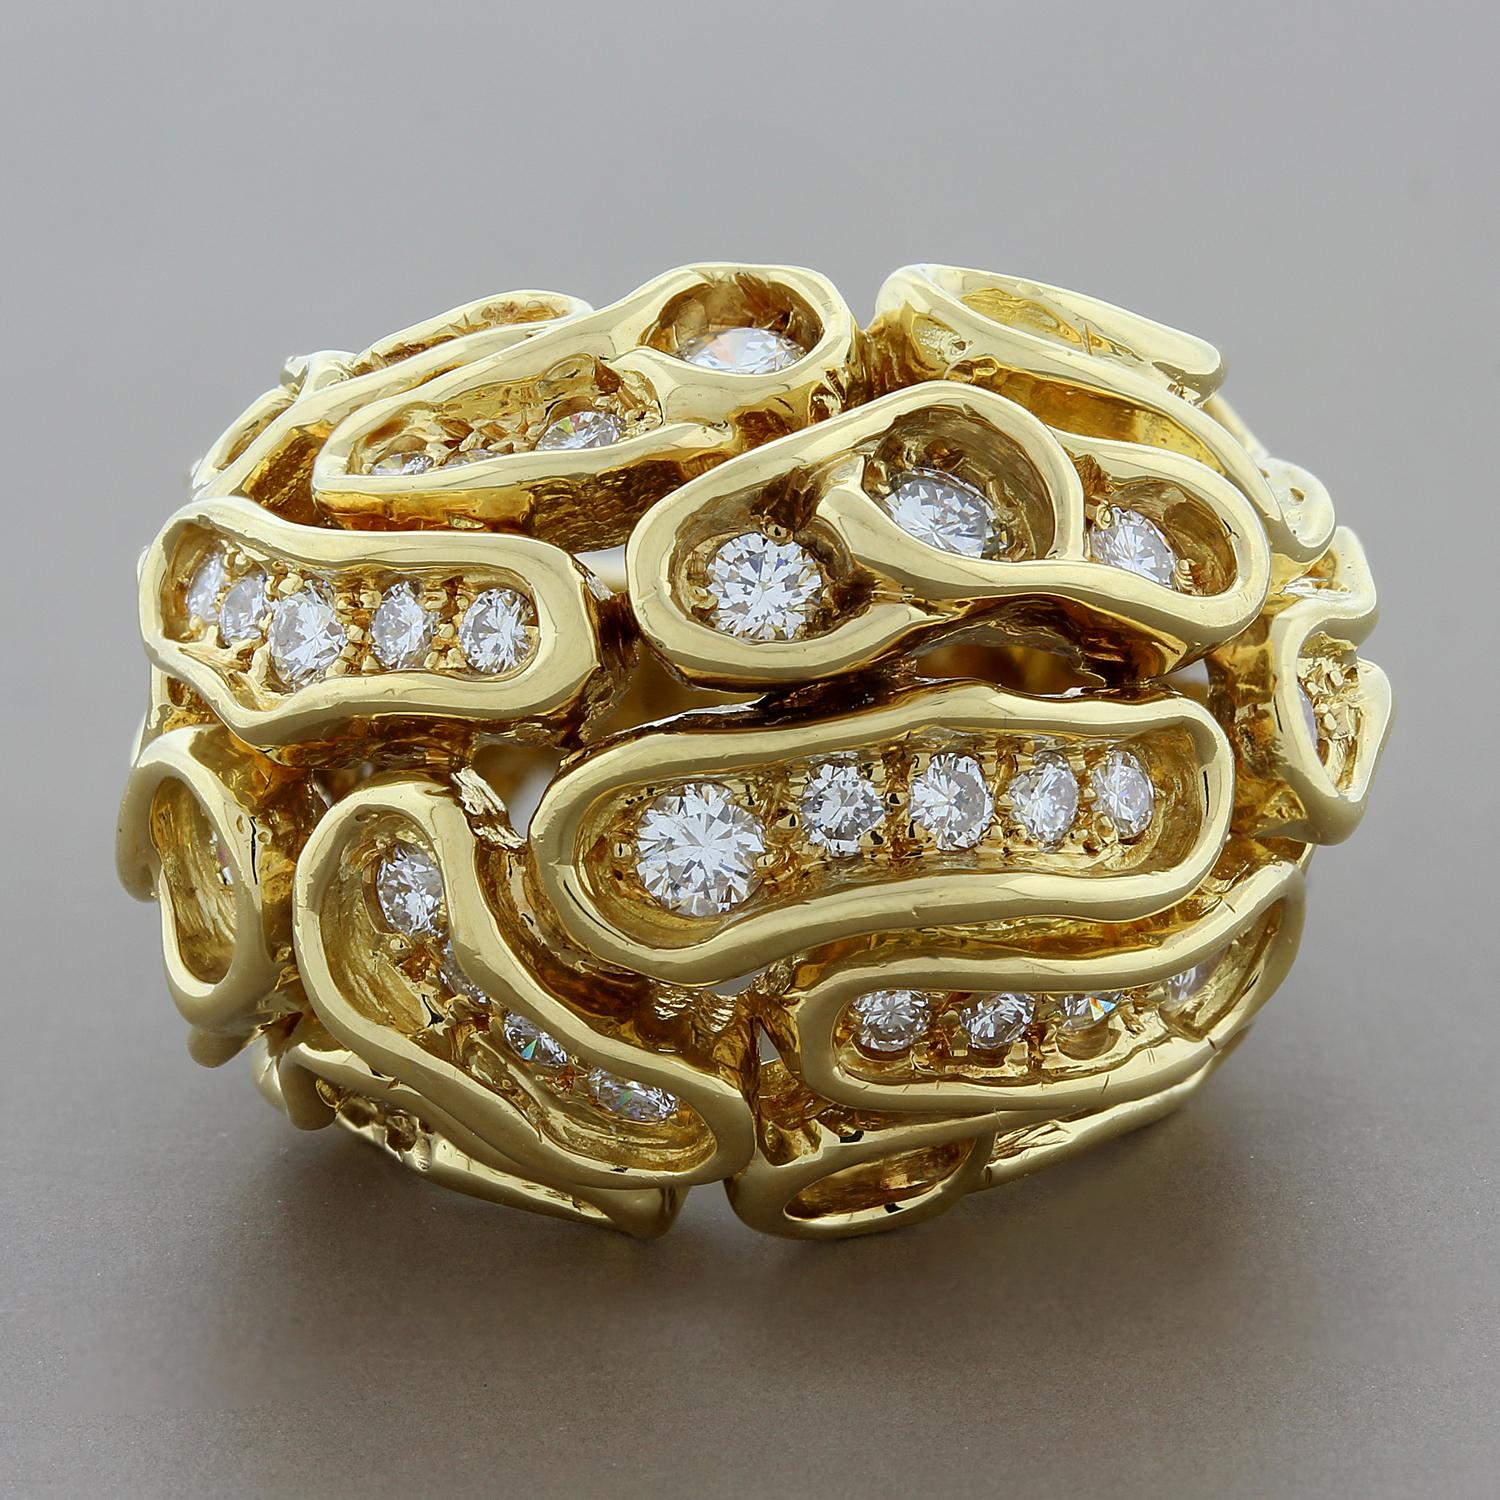 This stylish and elegant estate cocktail ring features 1.65 carats of round cut VS quality diamonds set in the puzzle like setting. The domed ring is beautifully set in 18K yellow gold with diamonds that go all the way to the very end.

Currently